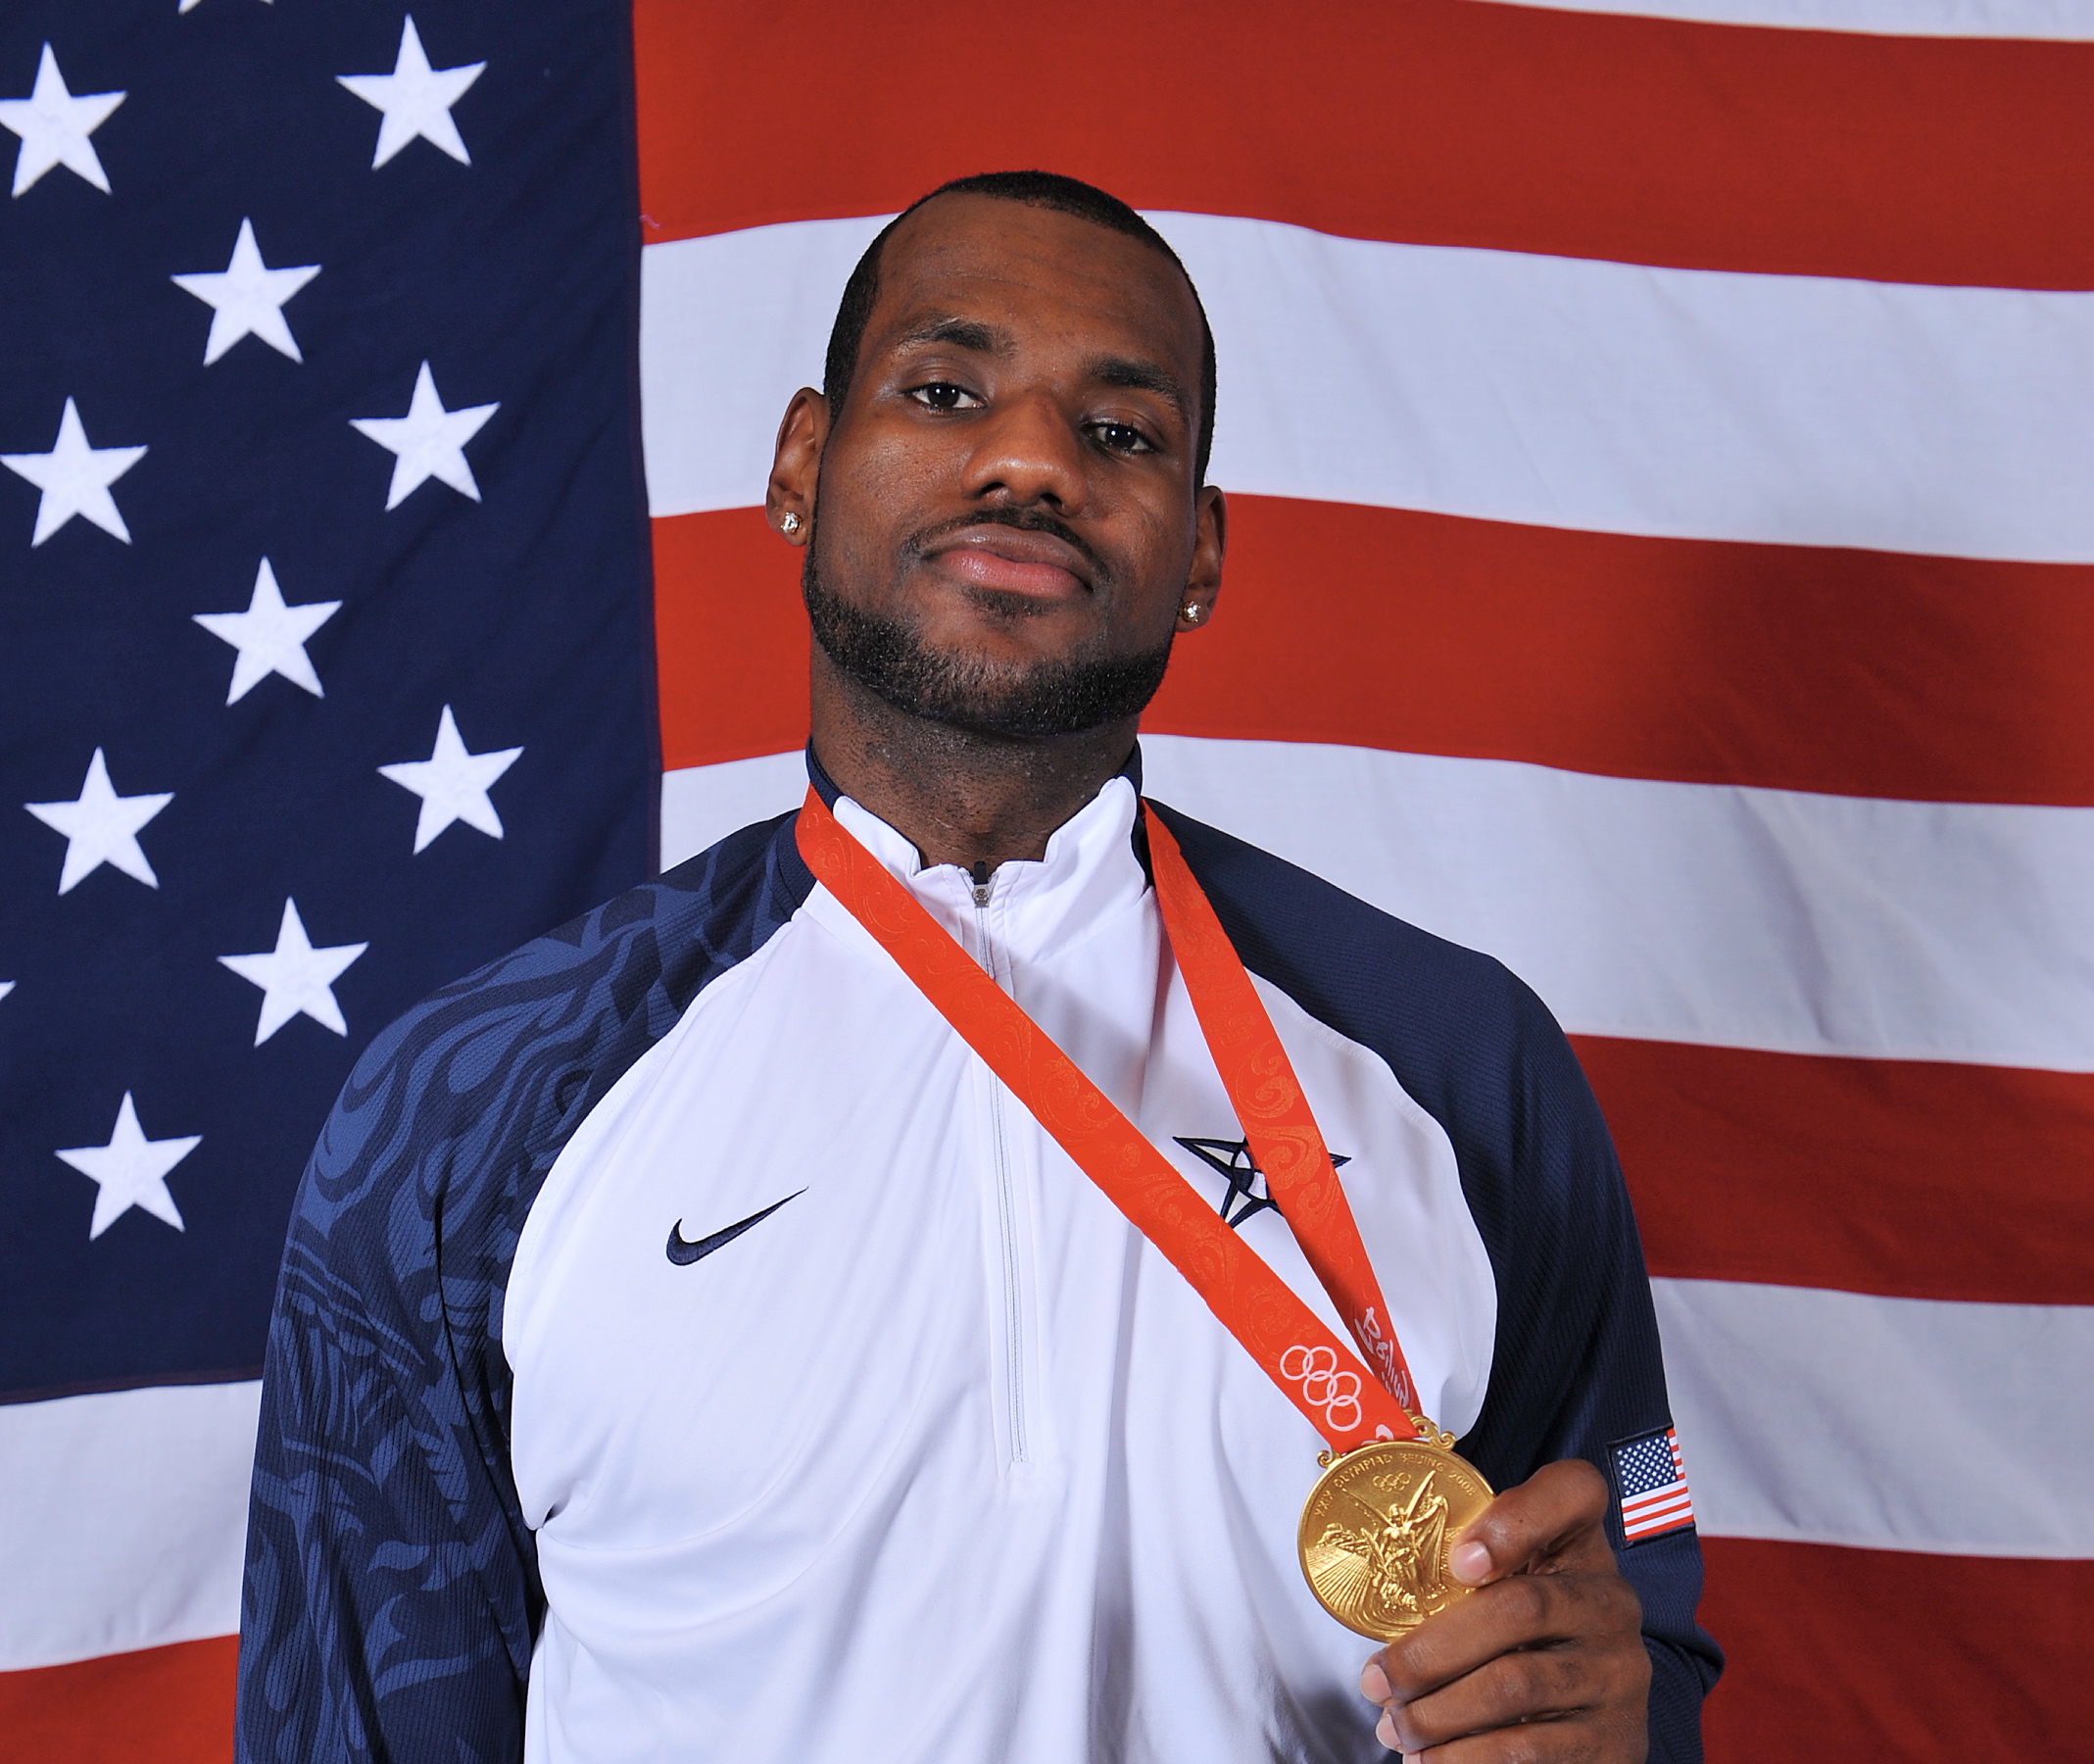 Olympic sports in which LeBron James 